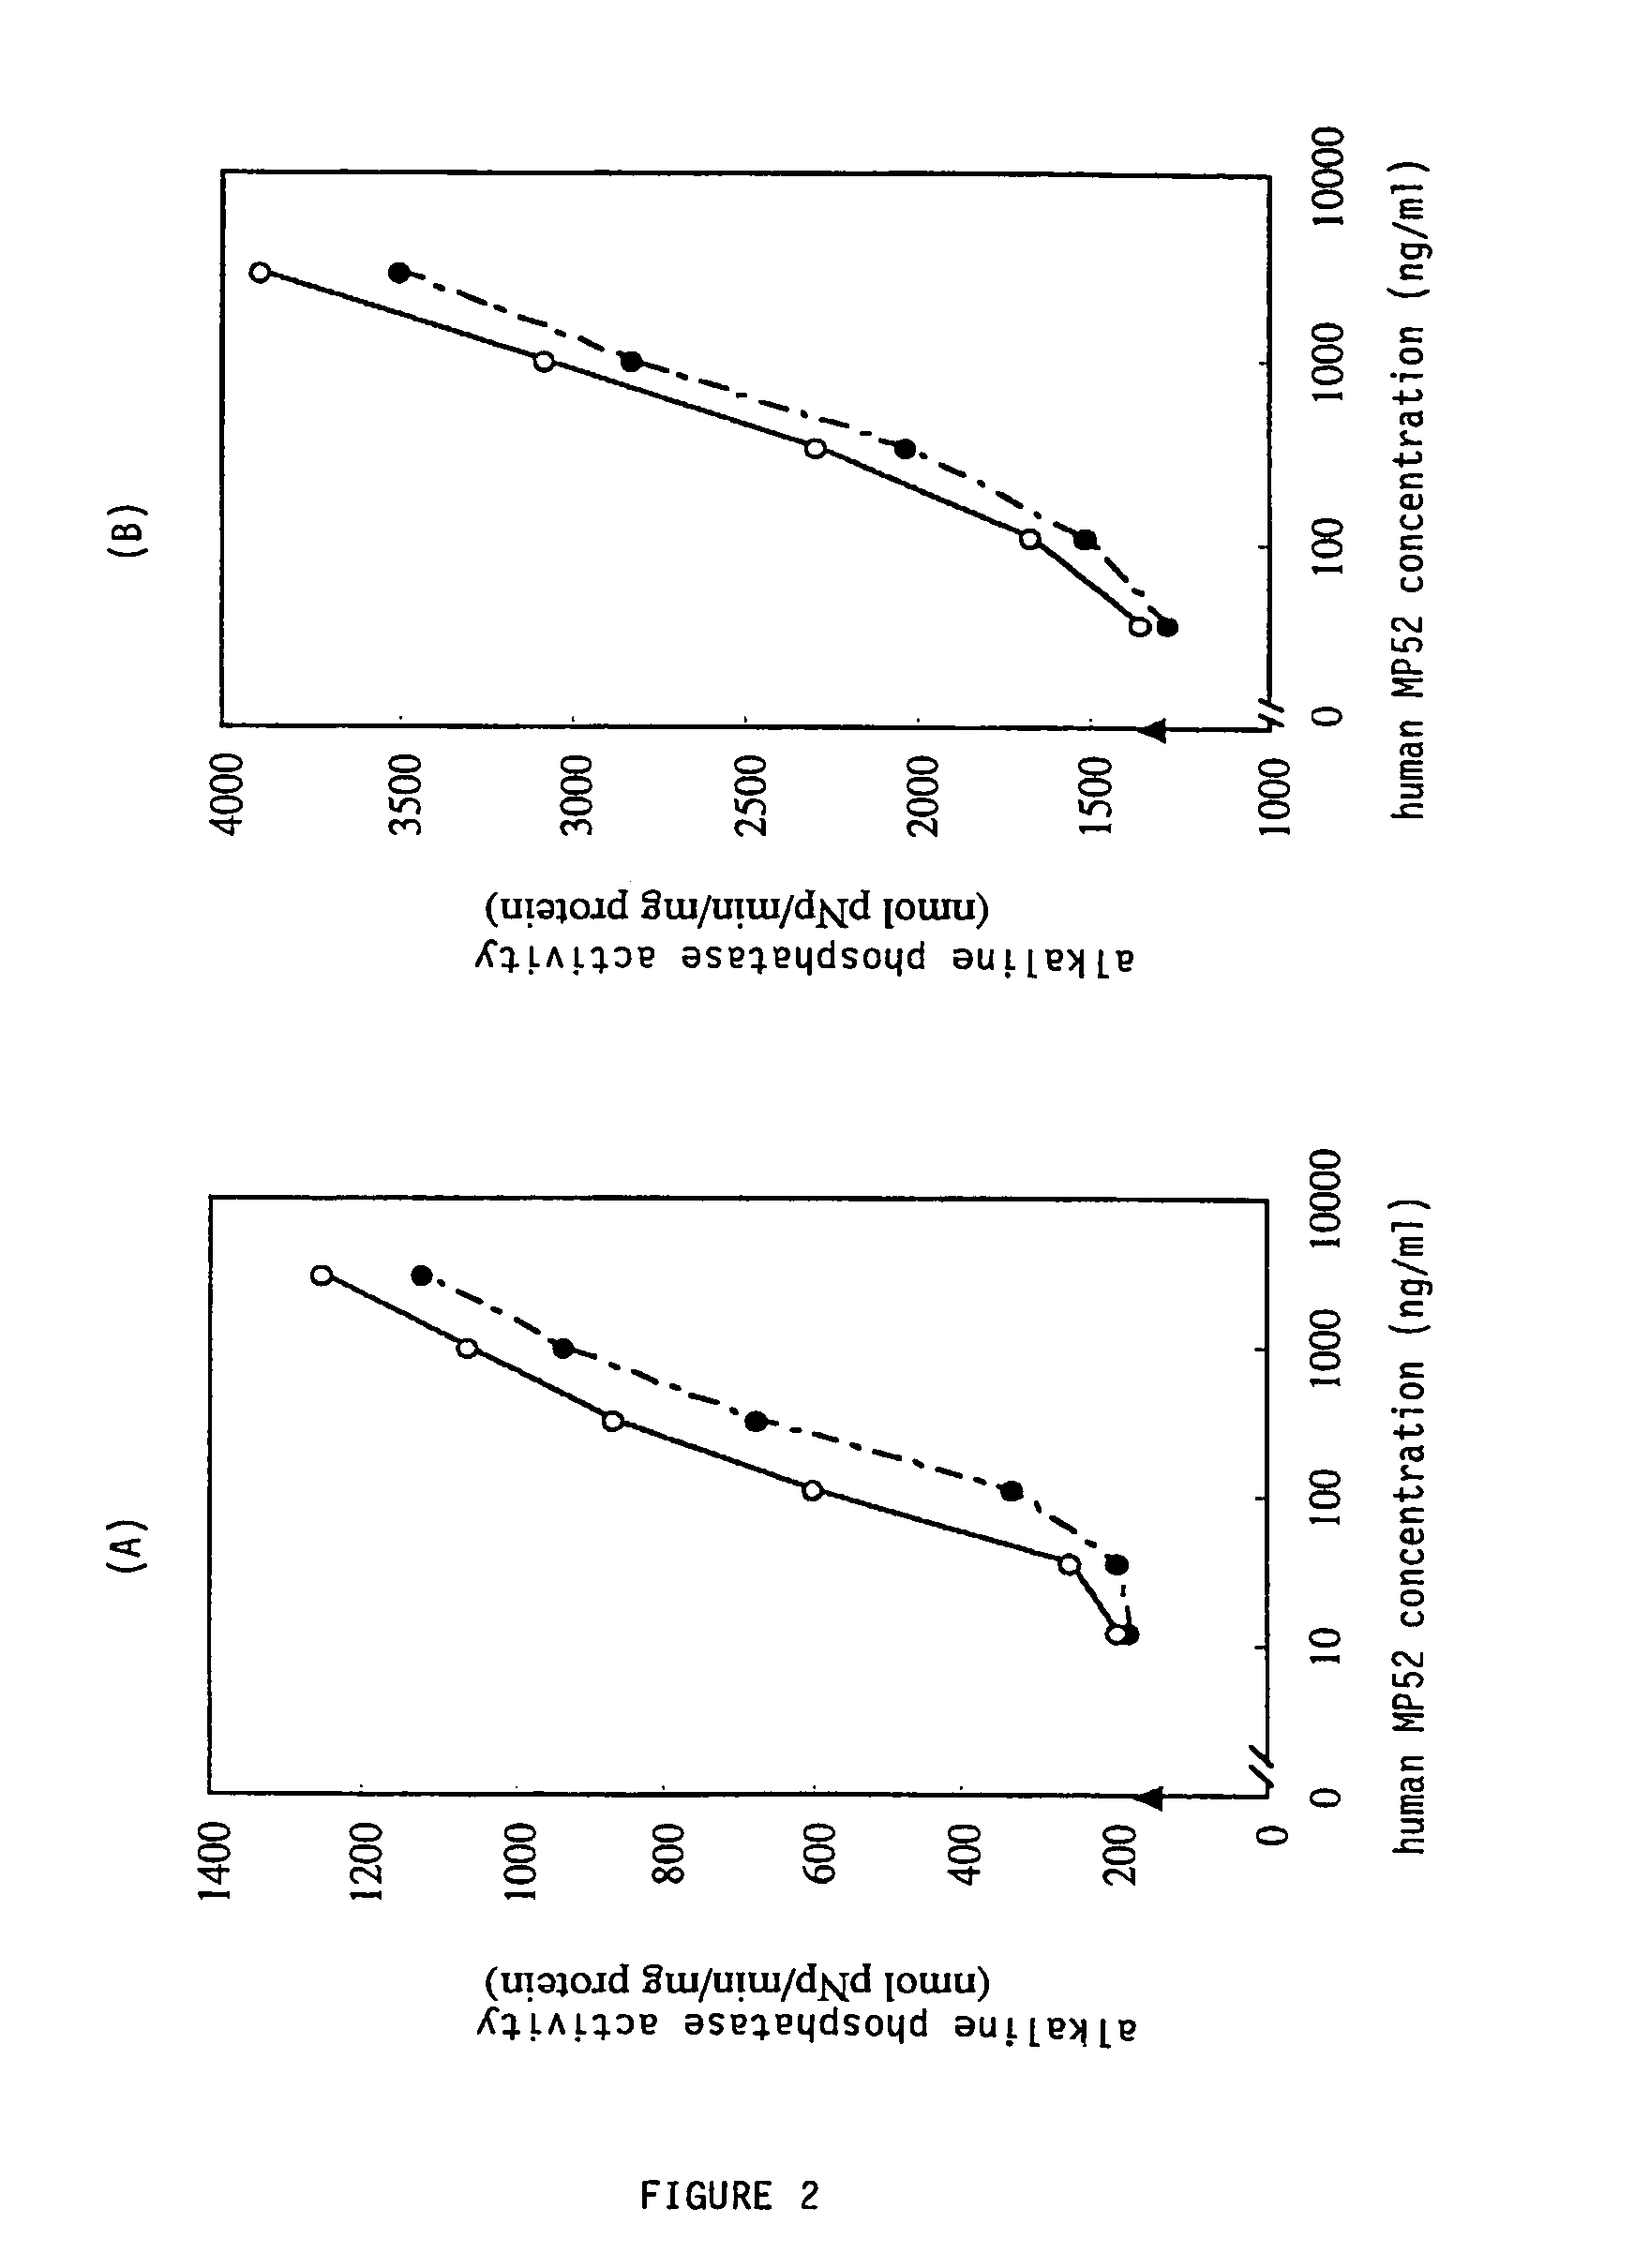 Monomer protein with bone morphogenetic activity and medicinal agent containing the same for preventing and treating diseases of cartilage and bone